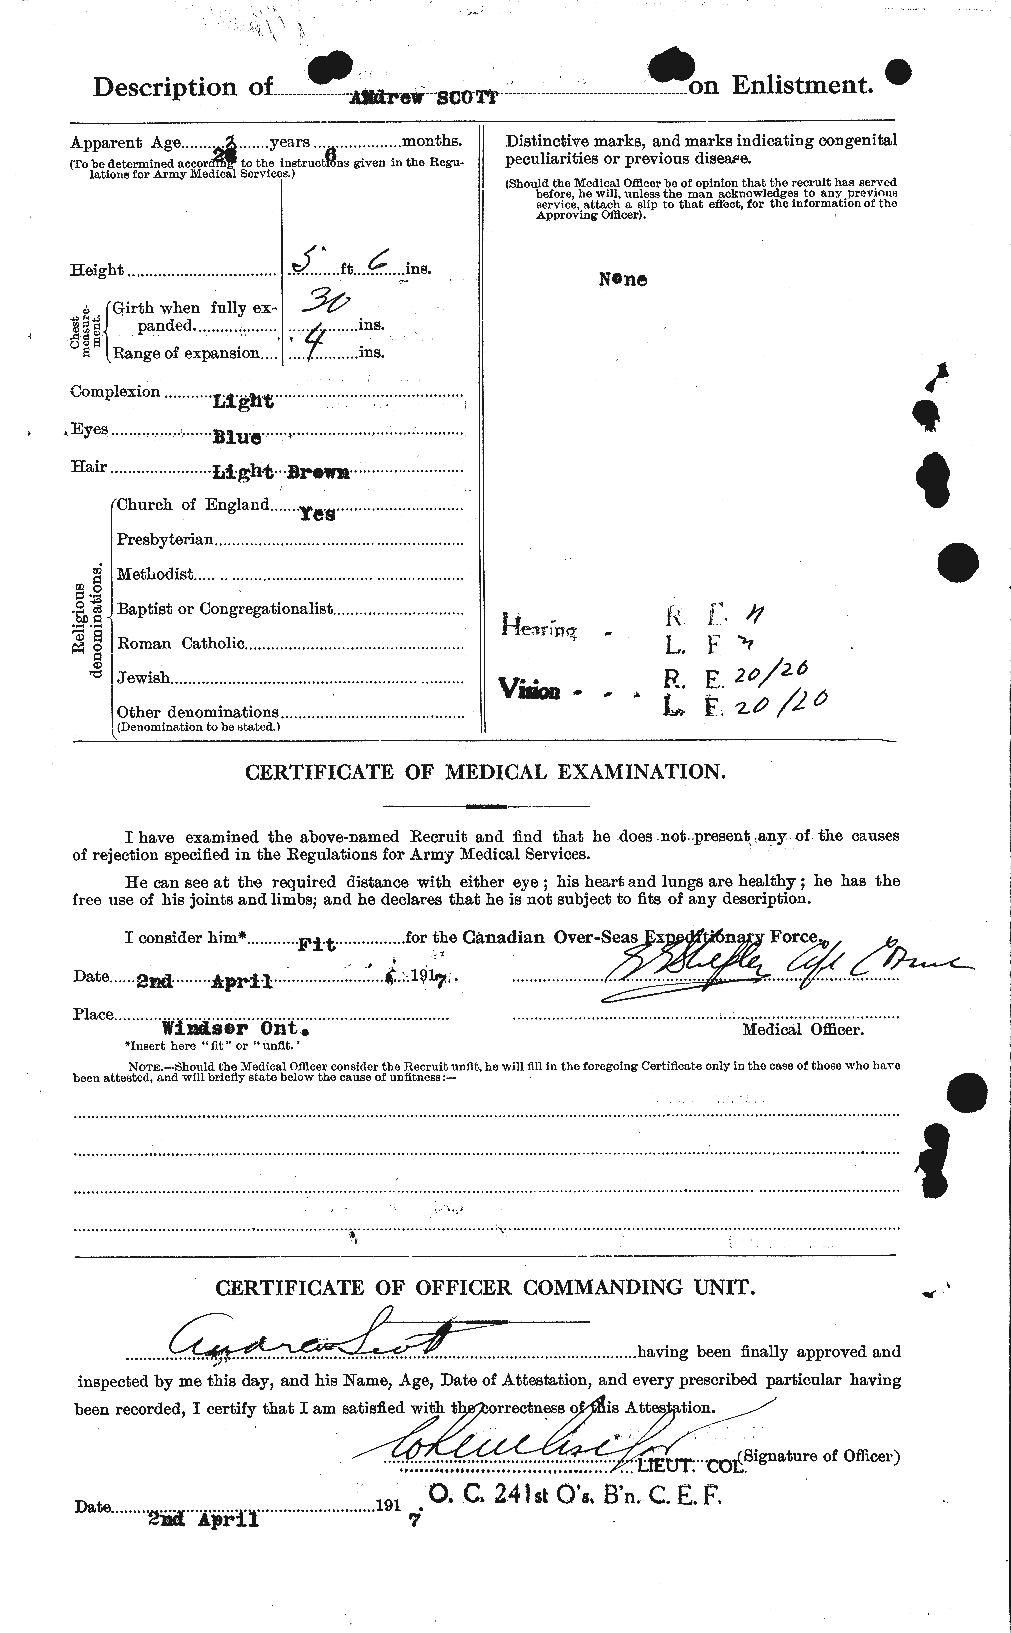 Personnel Records of the First World War - CEF 086450b